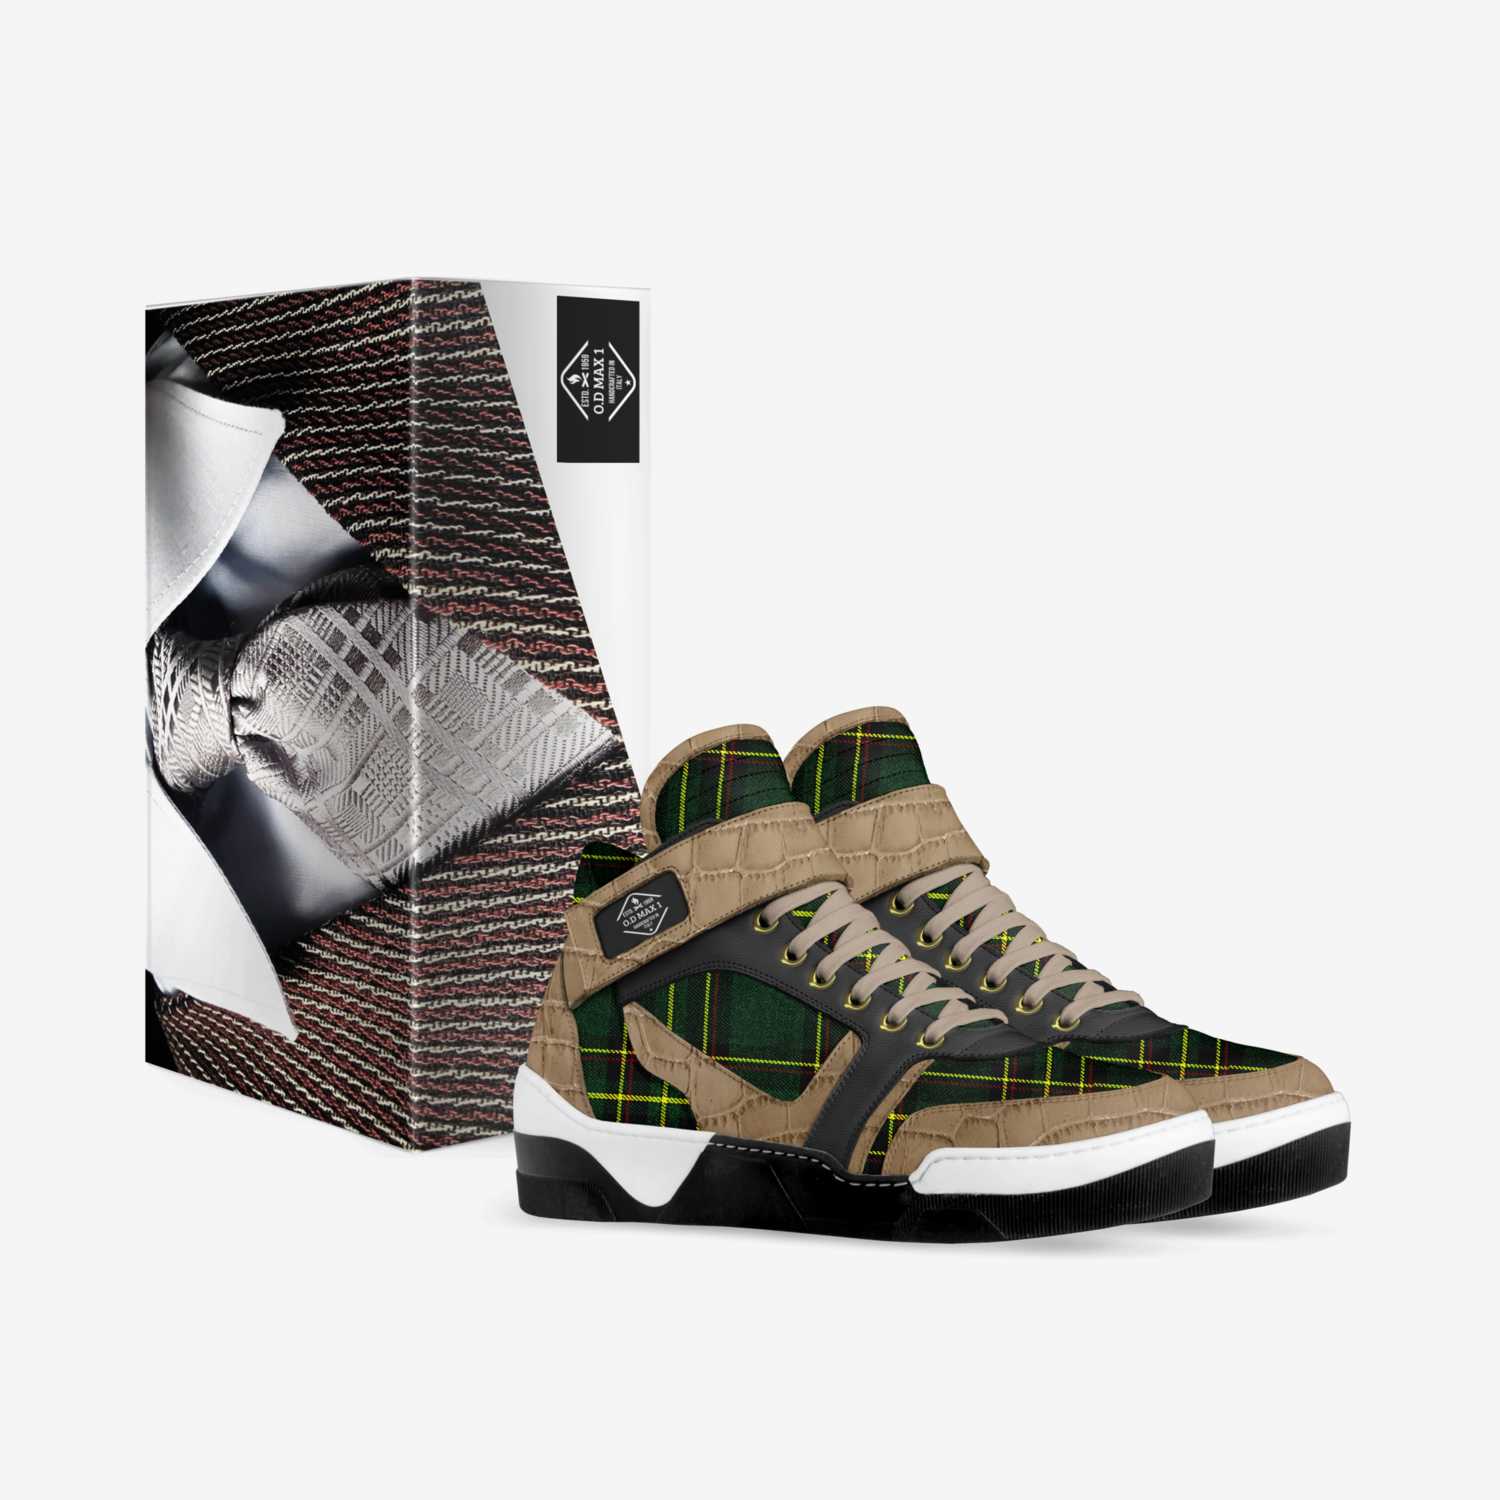 O.D MAX 1 custom made in Italy shoes by Krishawn Kemp | Box view